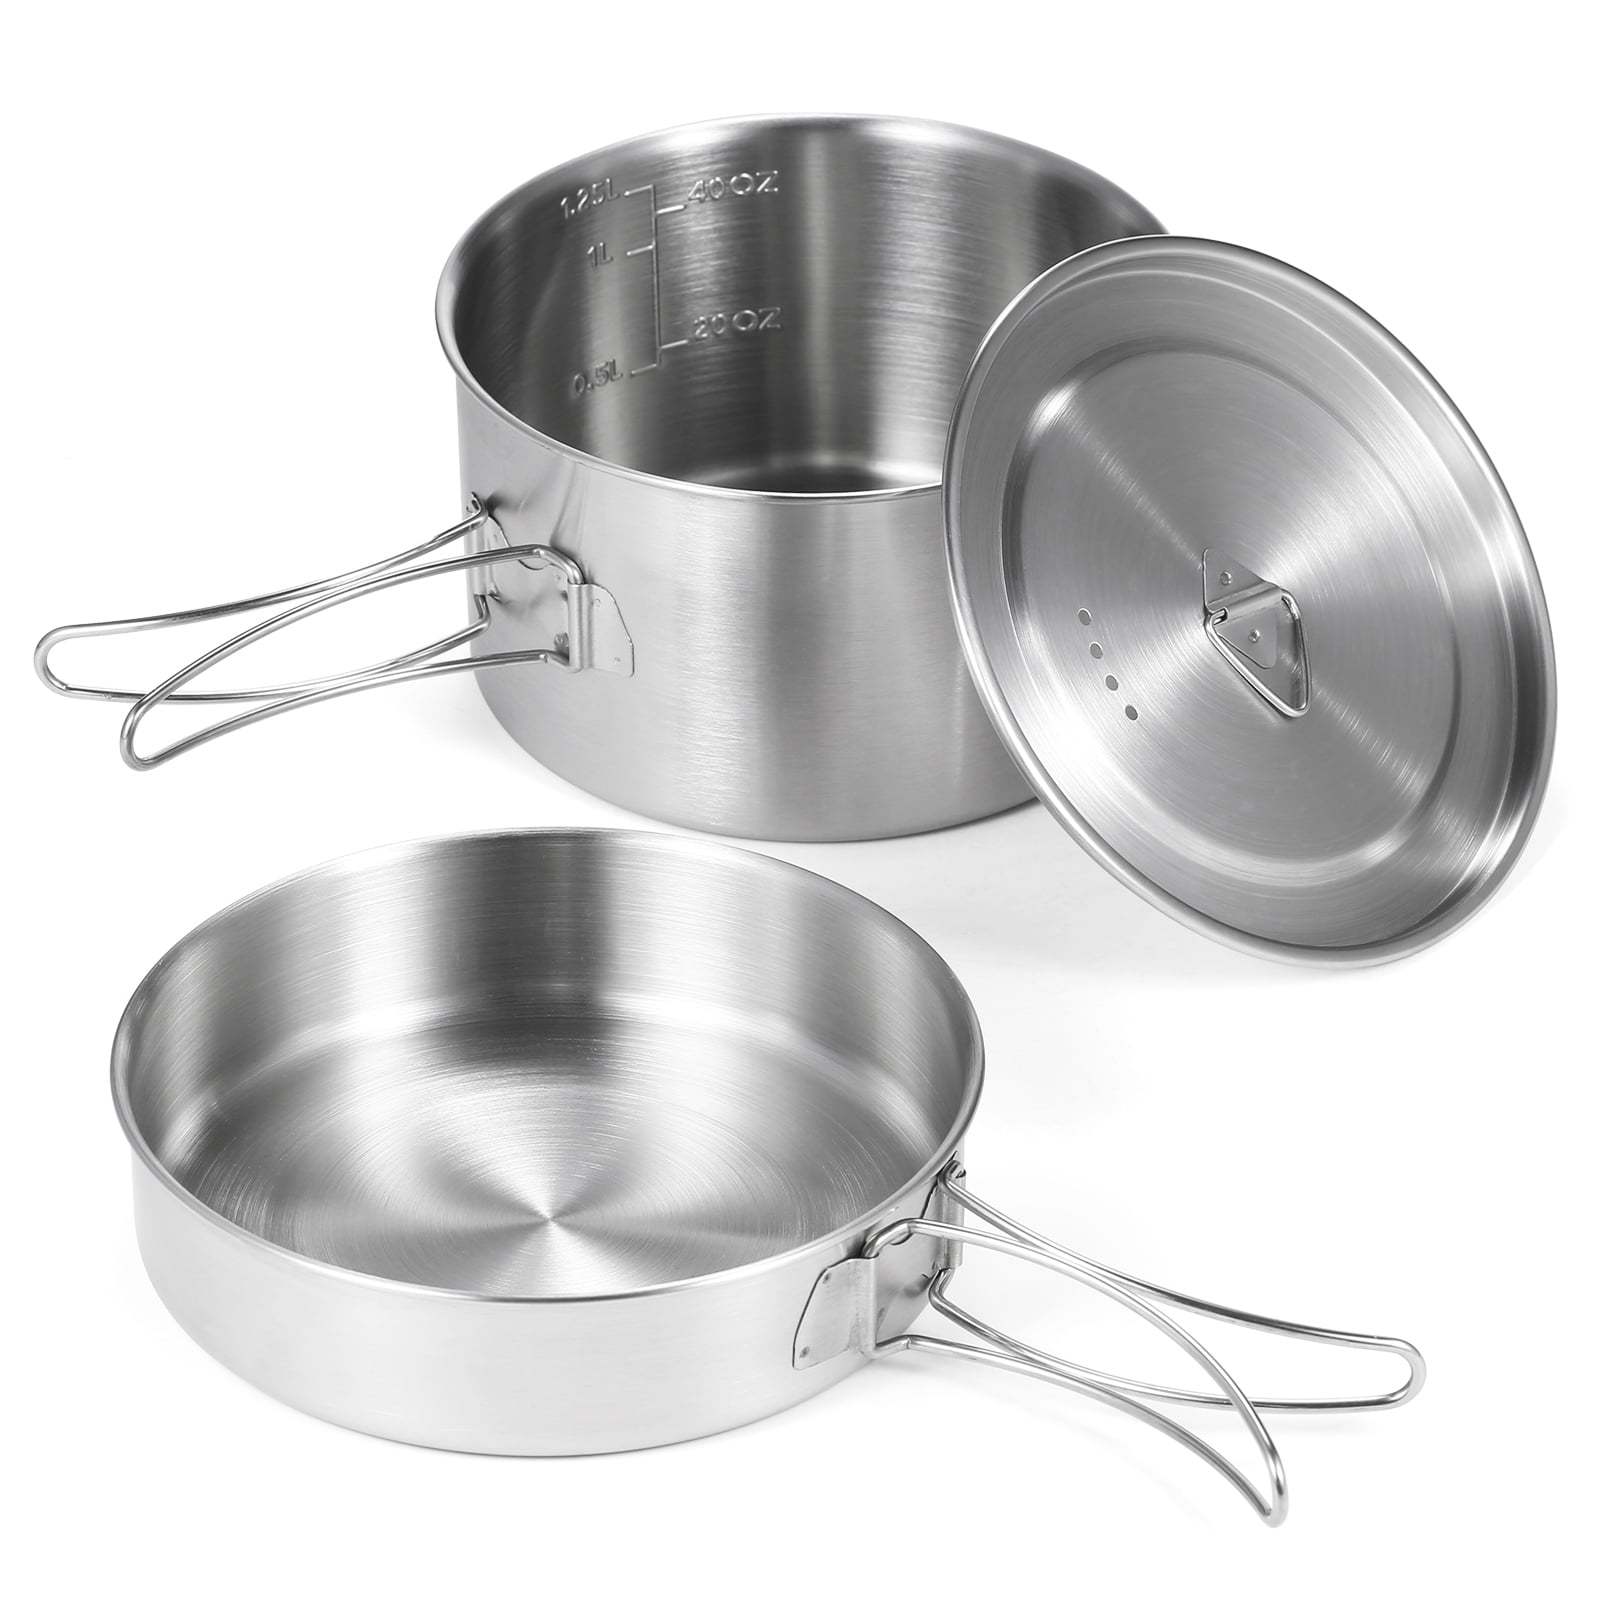 MIL-TEC cooking set stainless steel 4 pieces cookware camping